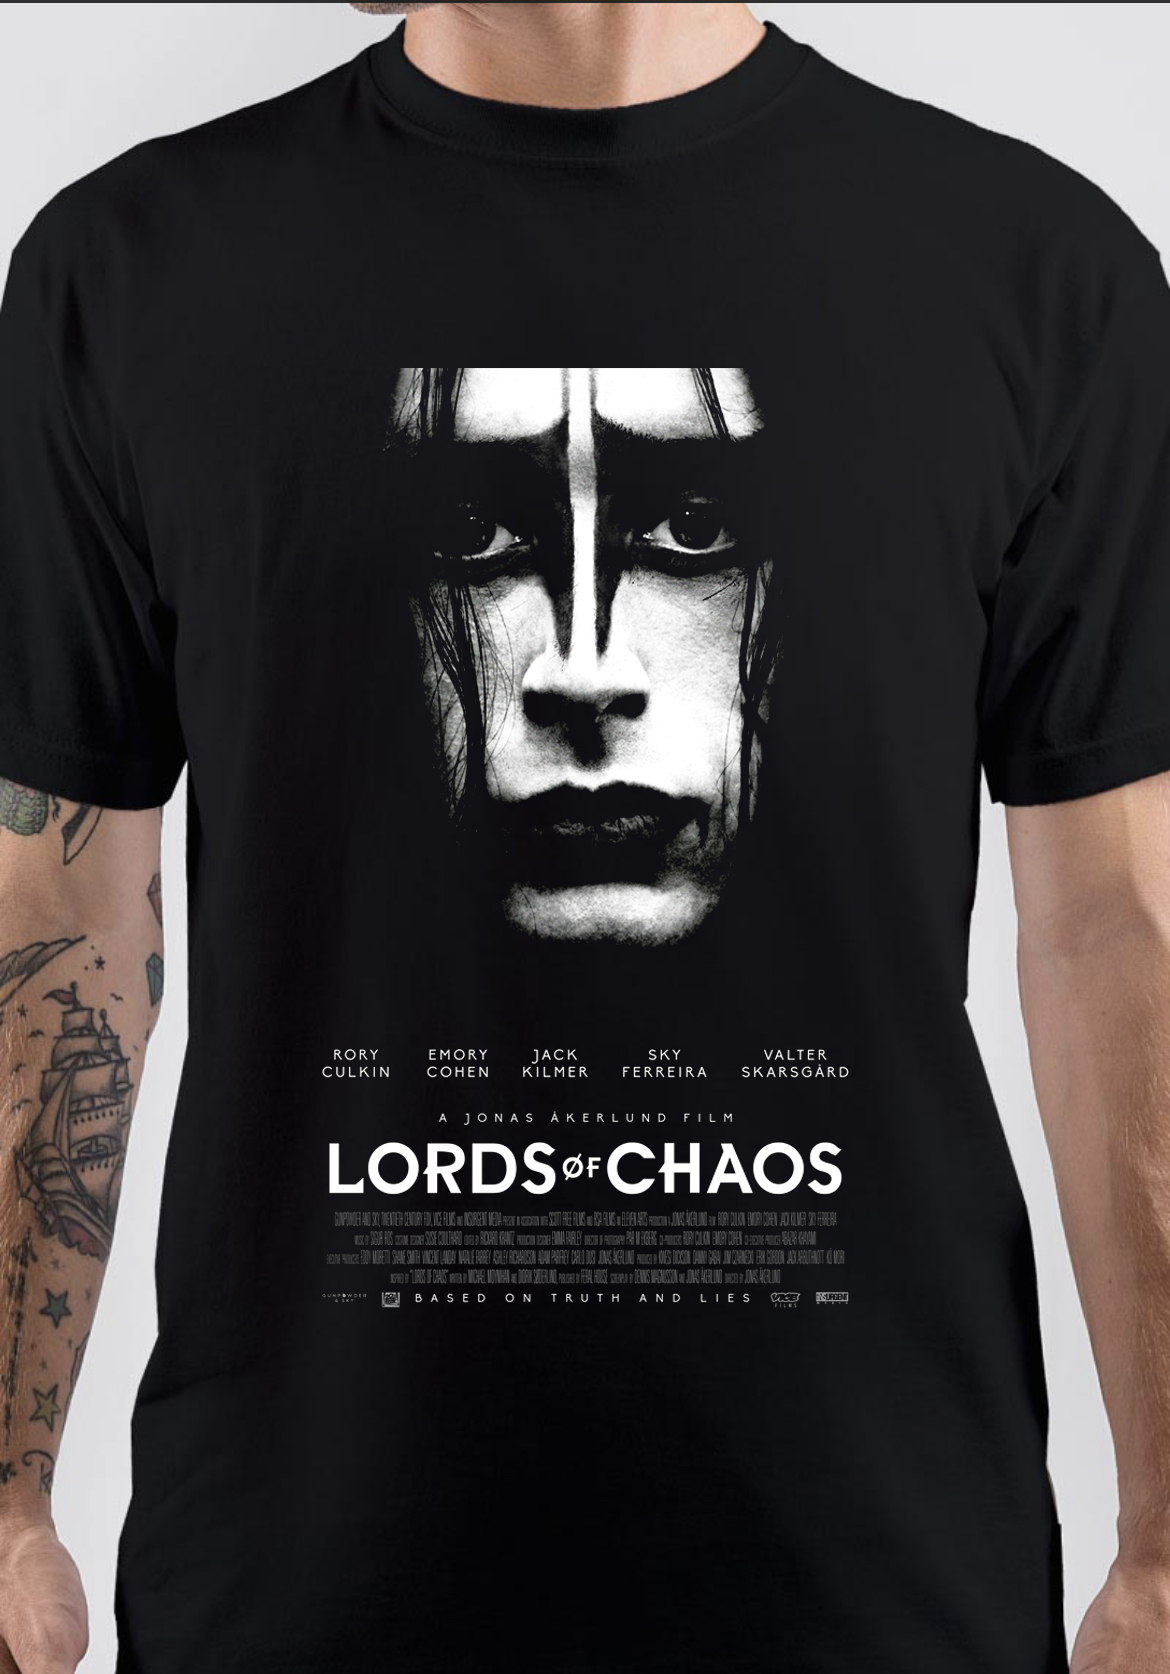 Lord Of Chaos T-Shirt And Merchandise